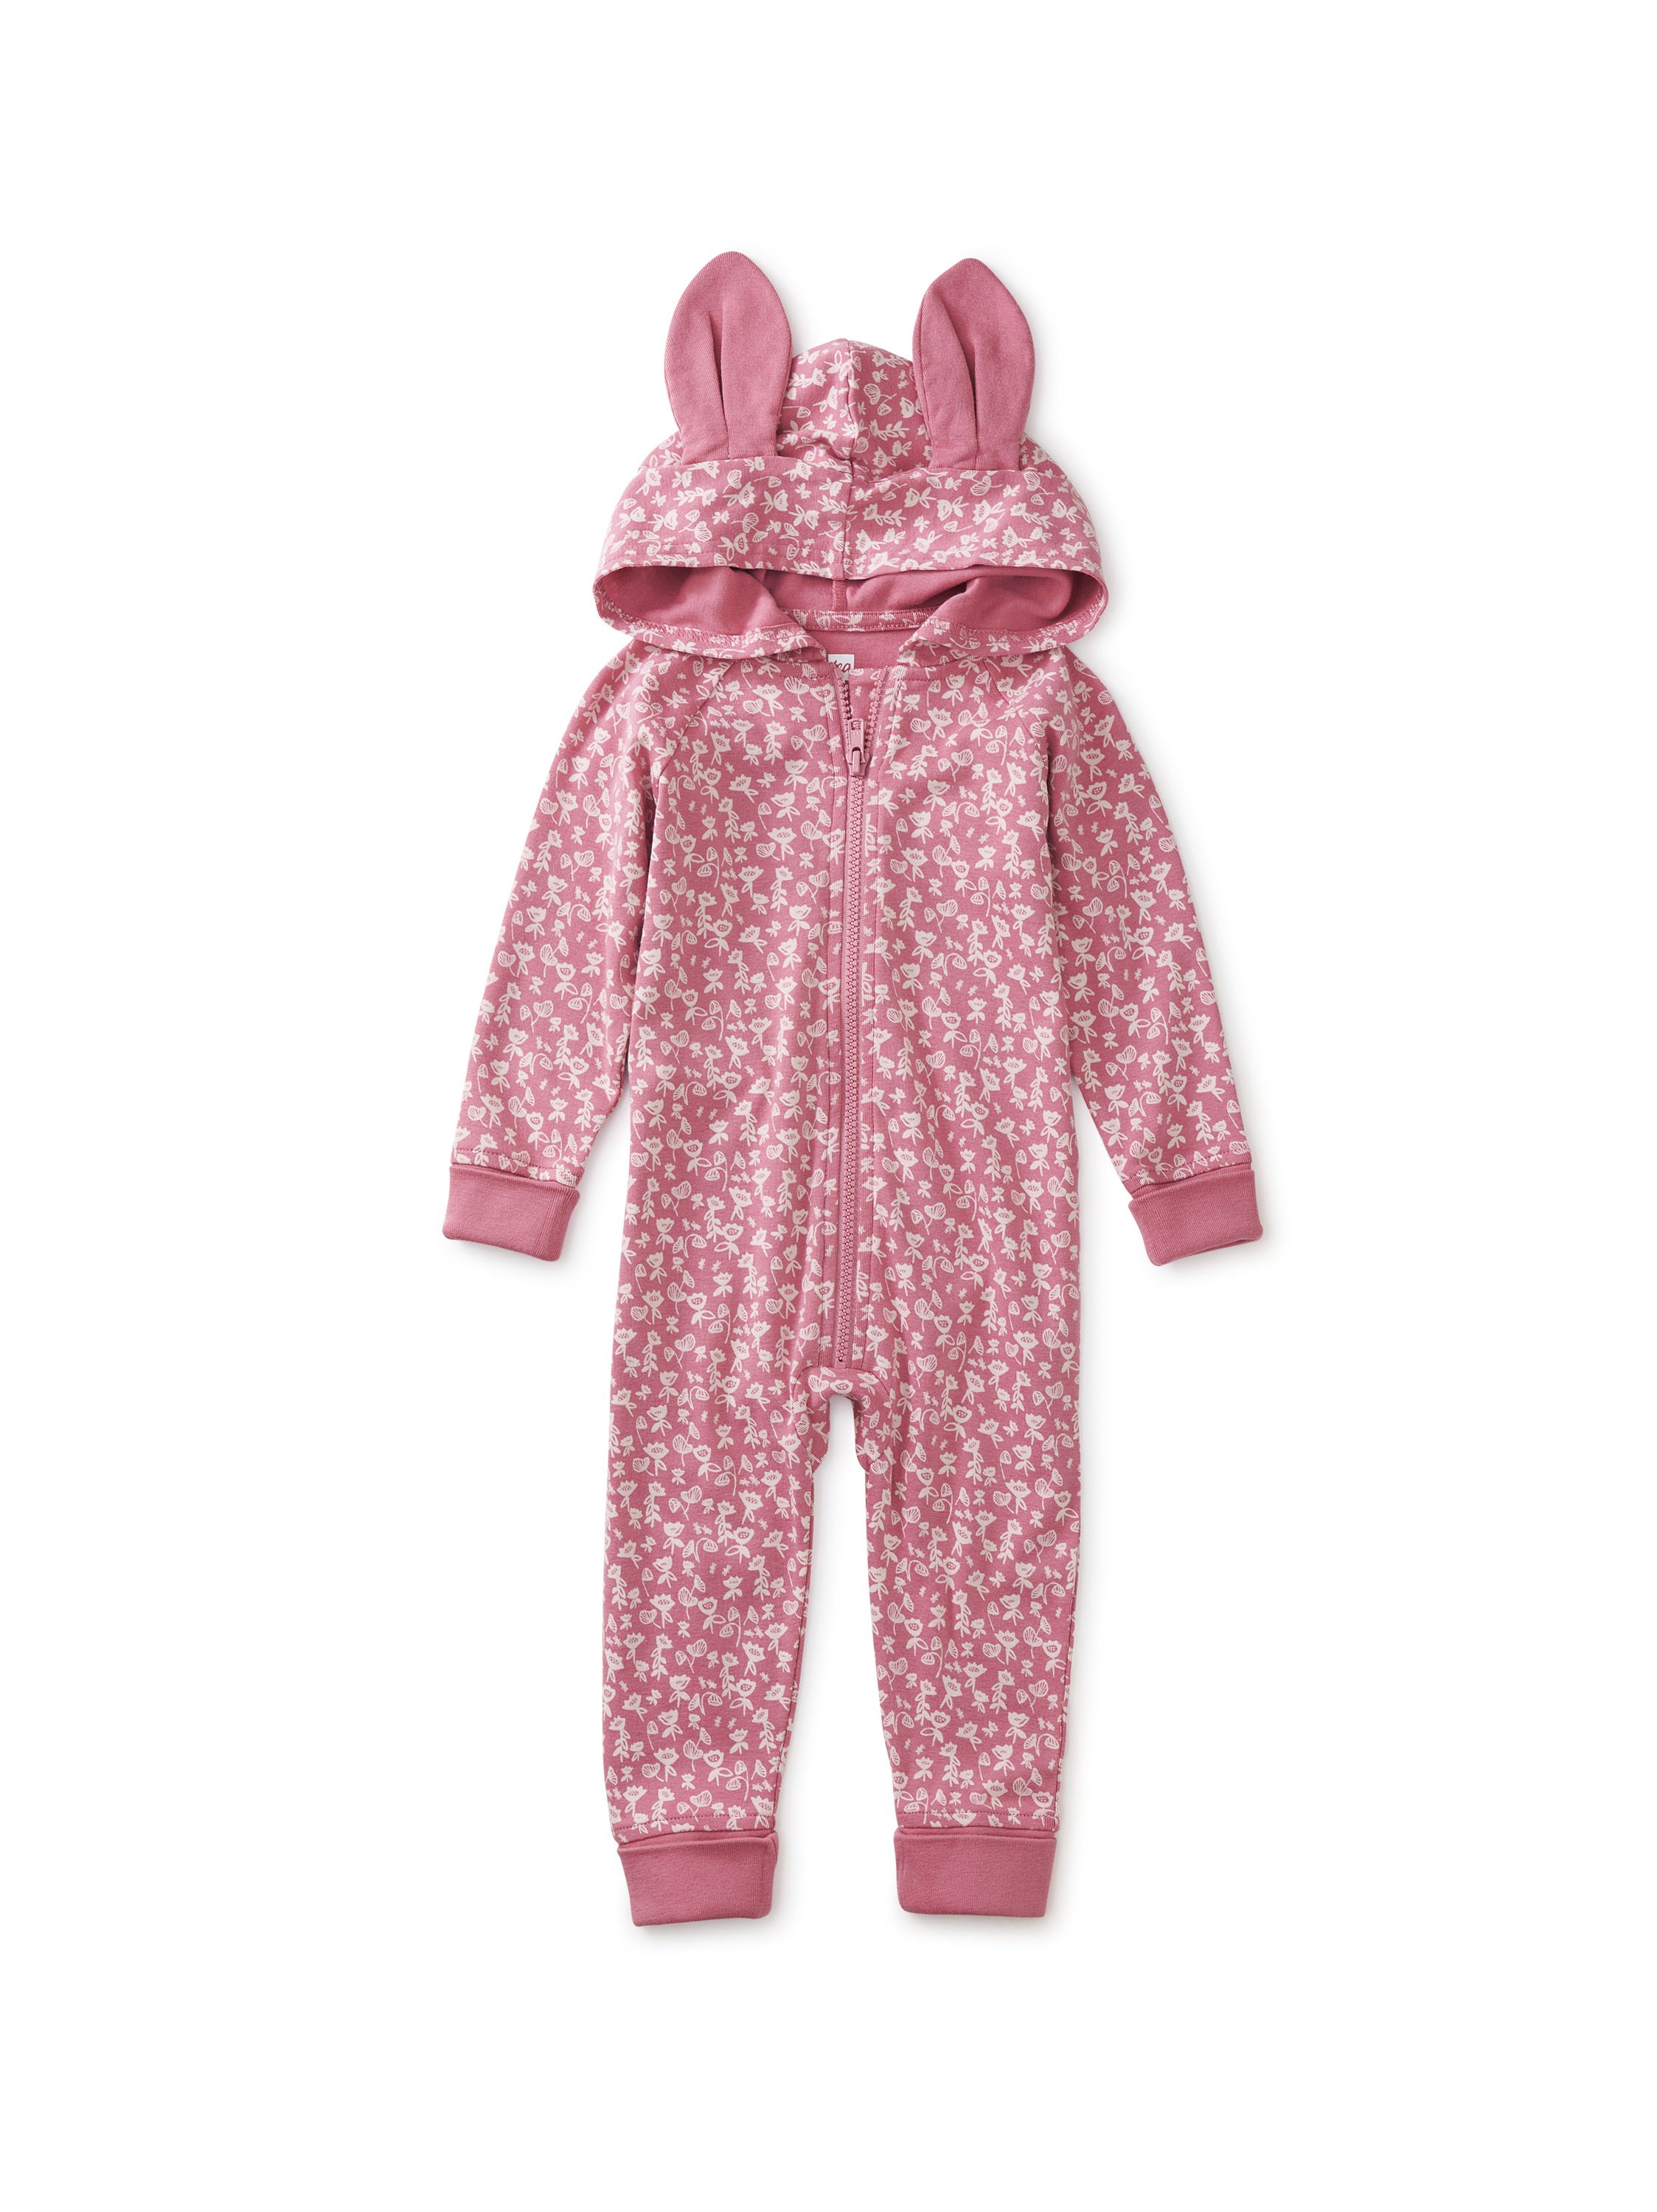 Bunny Ears Hooded Baby Romper | Tea Collection